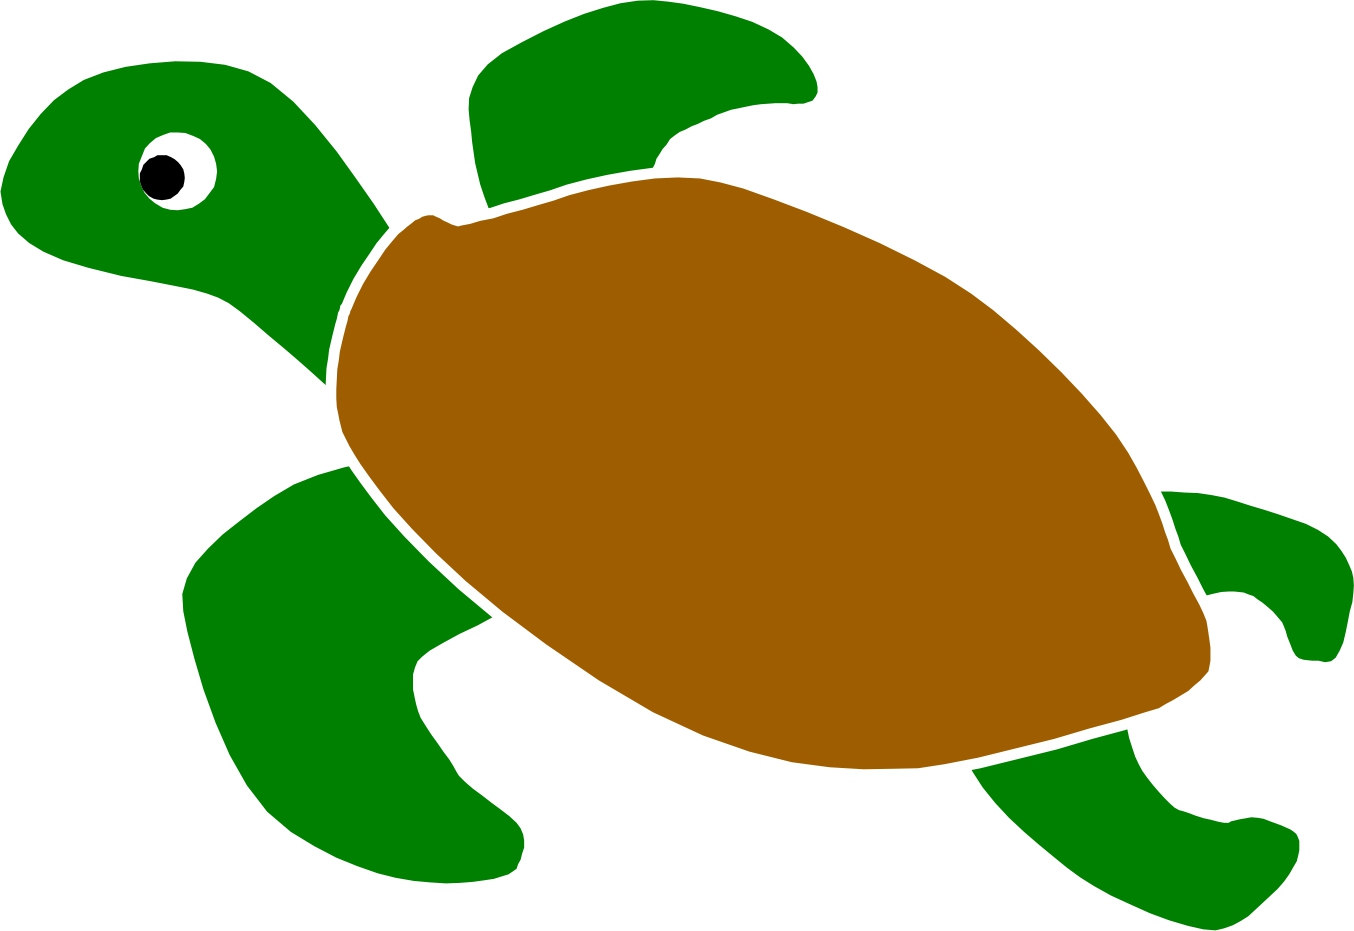 Turtles, Wallpapers and Cartoon